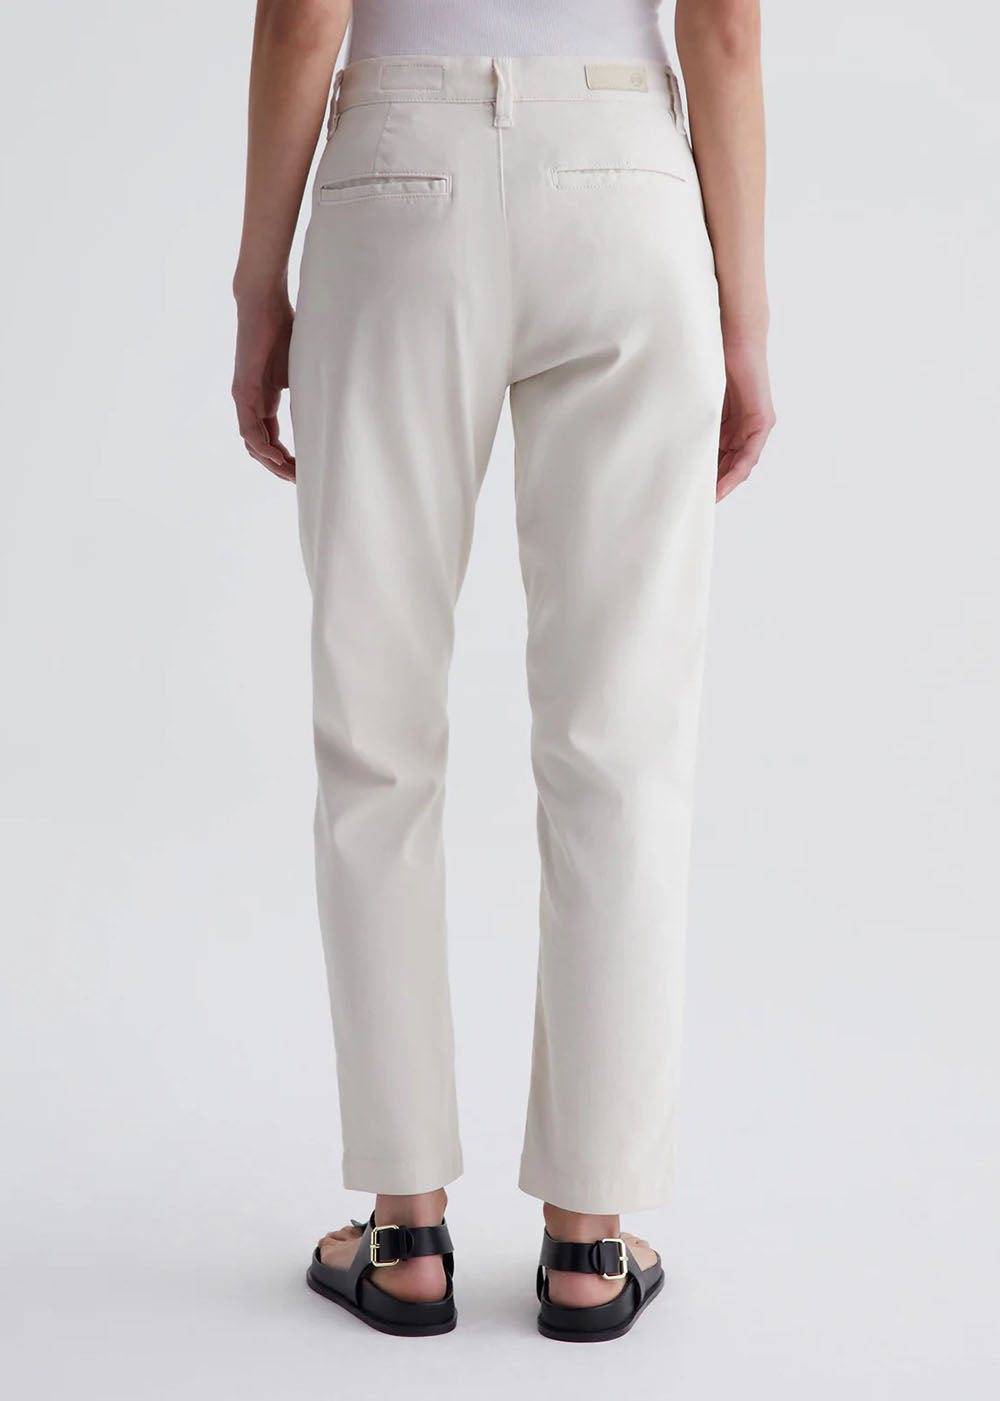 Caden Tailored Trousers - Opal Stone - AG Jeans Canada - Danali - SBW1613OPST